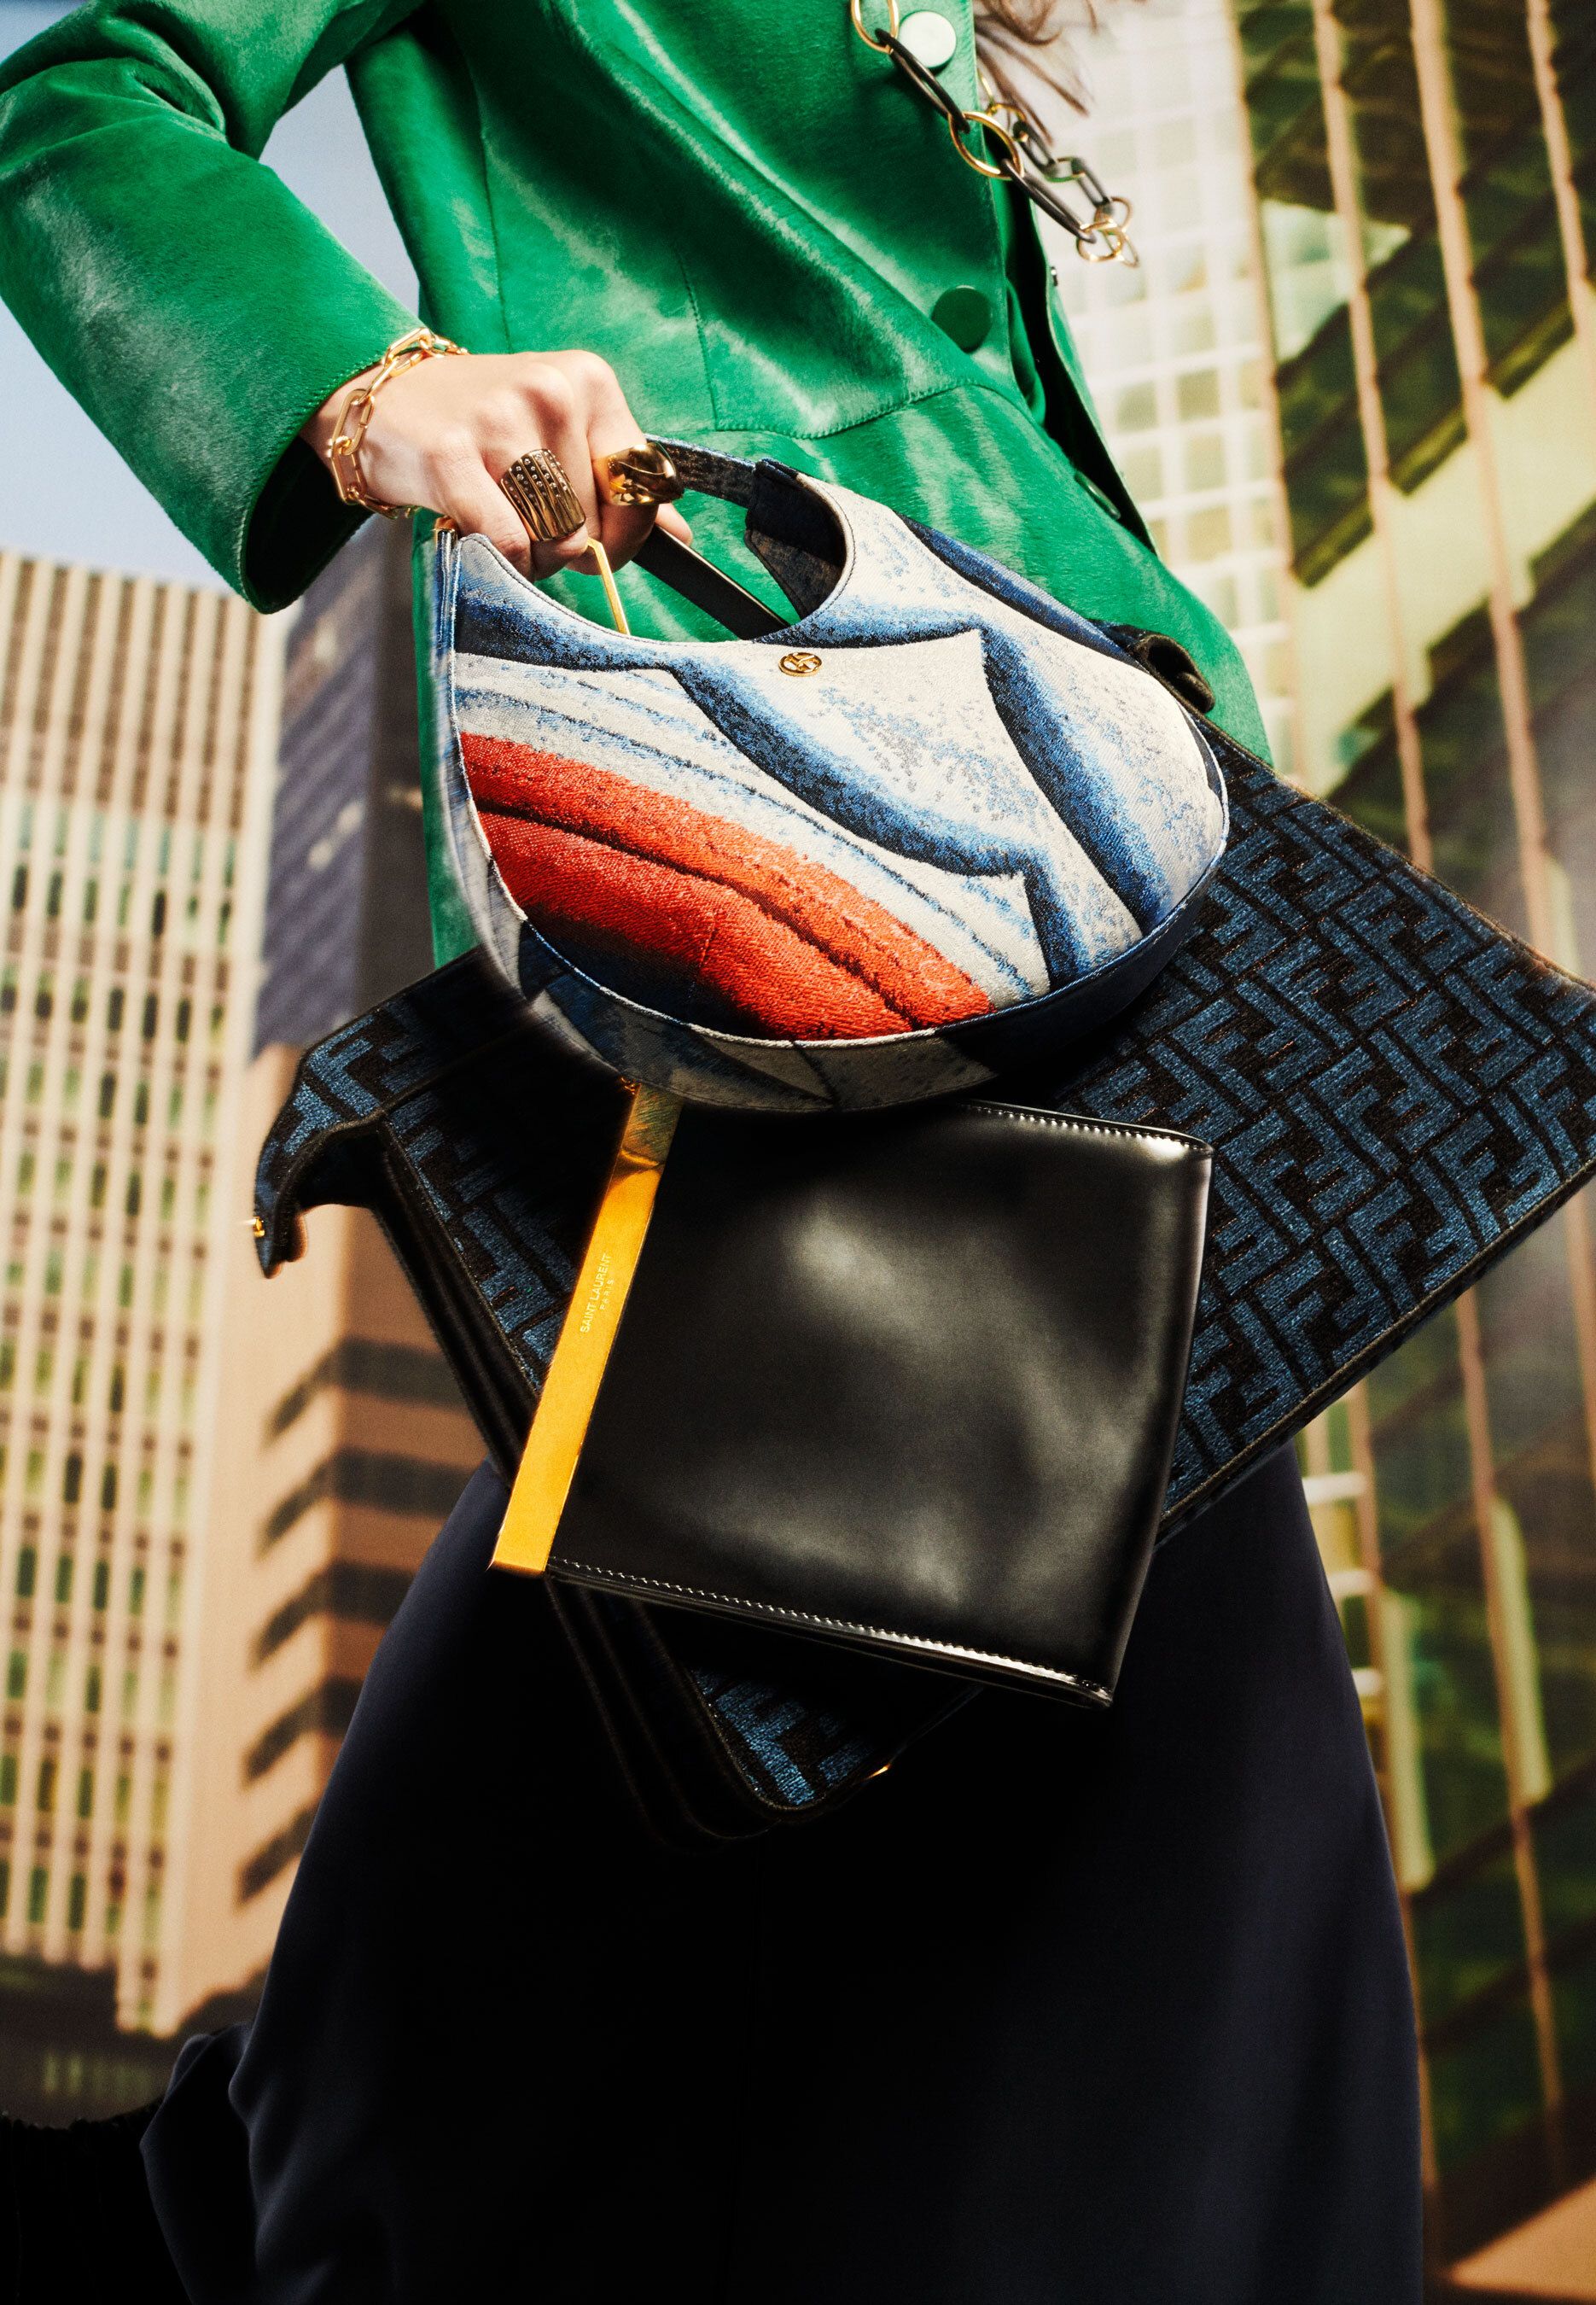 Quilted Handbags Will Be Everywhere This Fall—Here Are 9 Styles To Shop Now